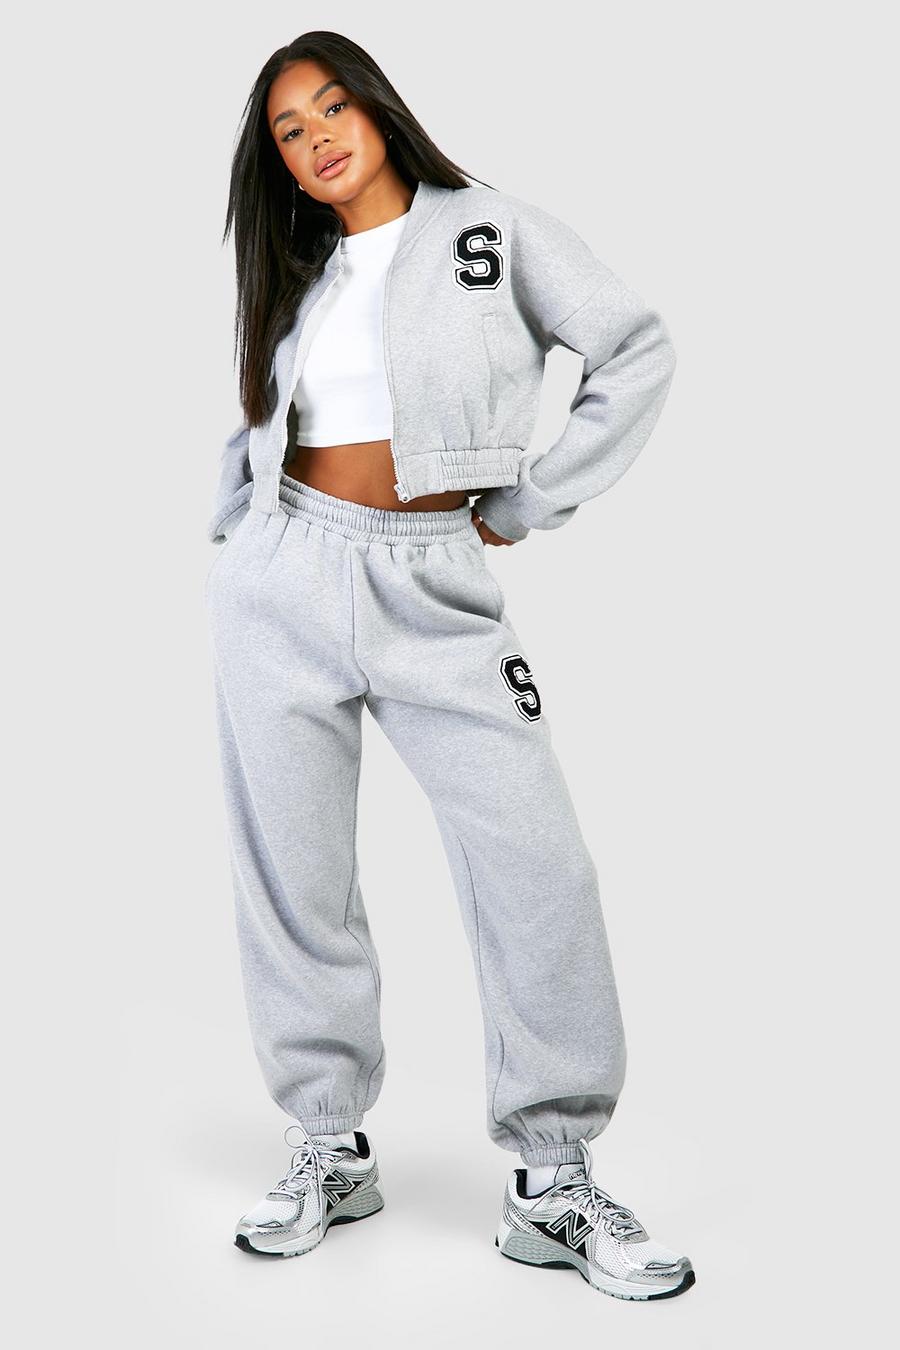 Grey marl Towelling Applique Bomber Jacket And Cuffed Track Pants Tracksuit